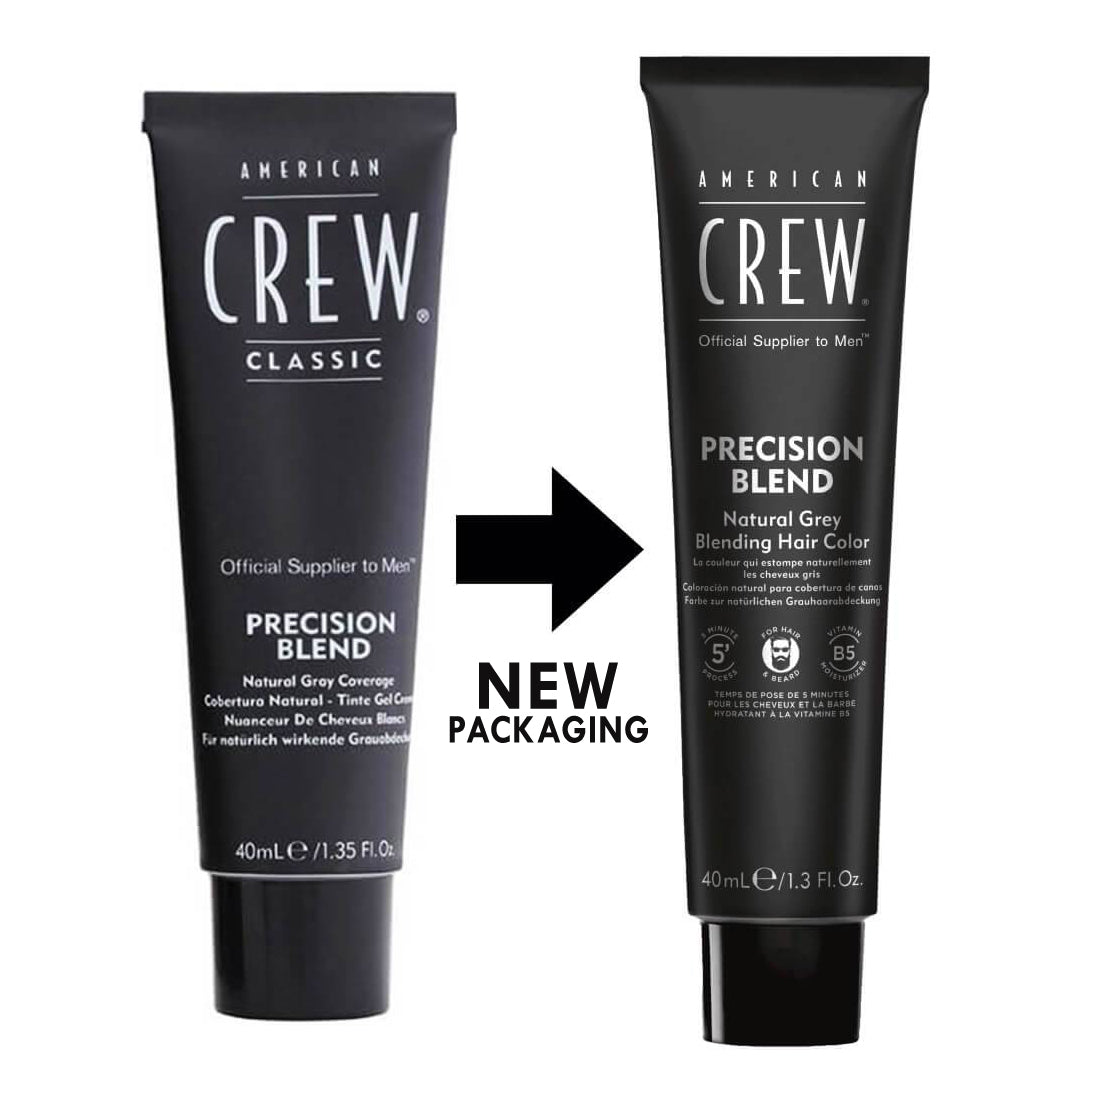 American Crew Precision Blend (3 x 40ml) new tube packaging